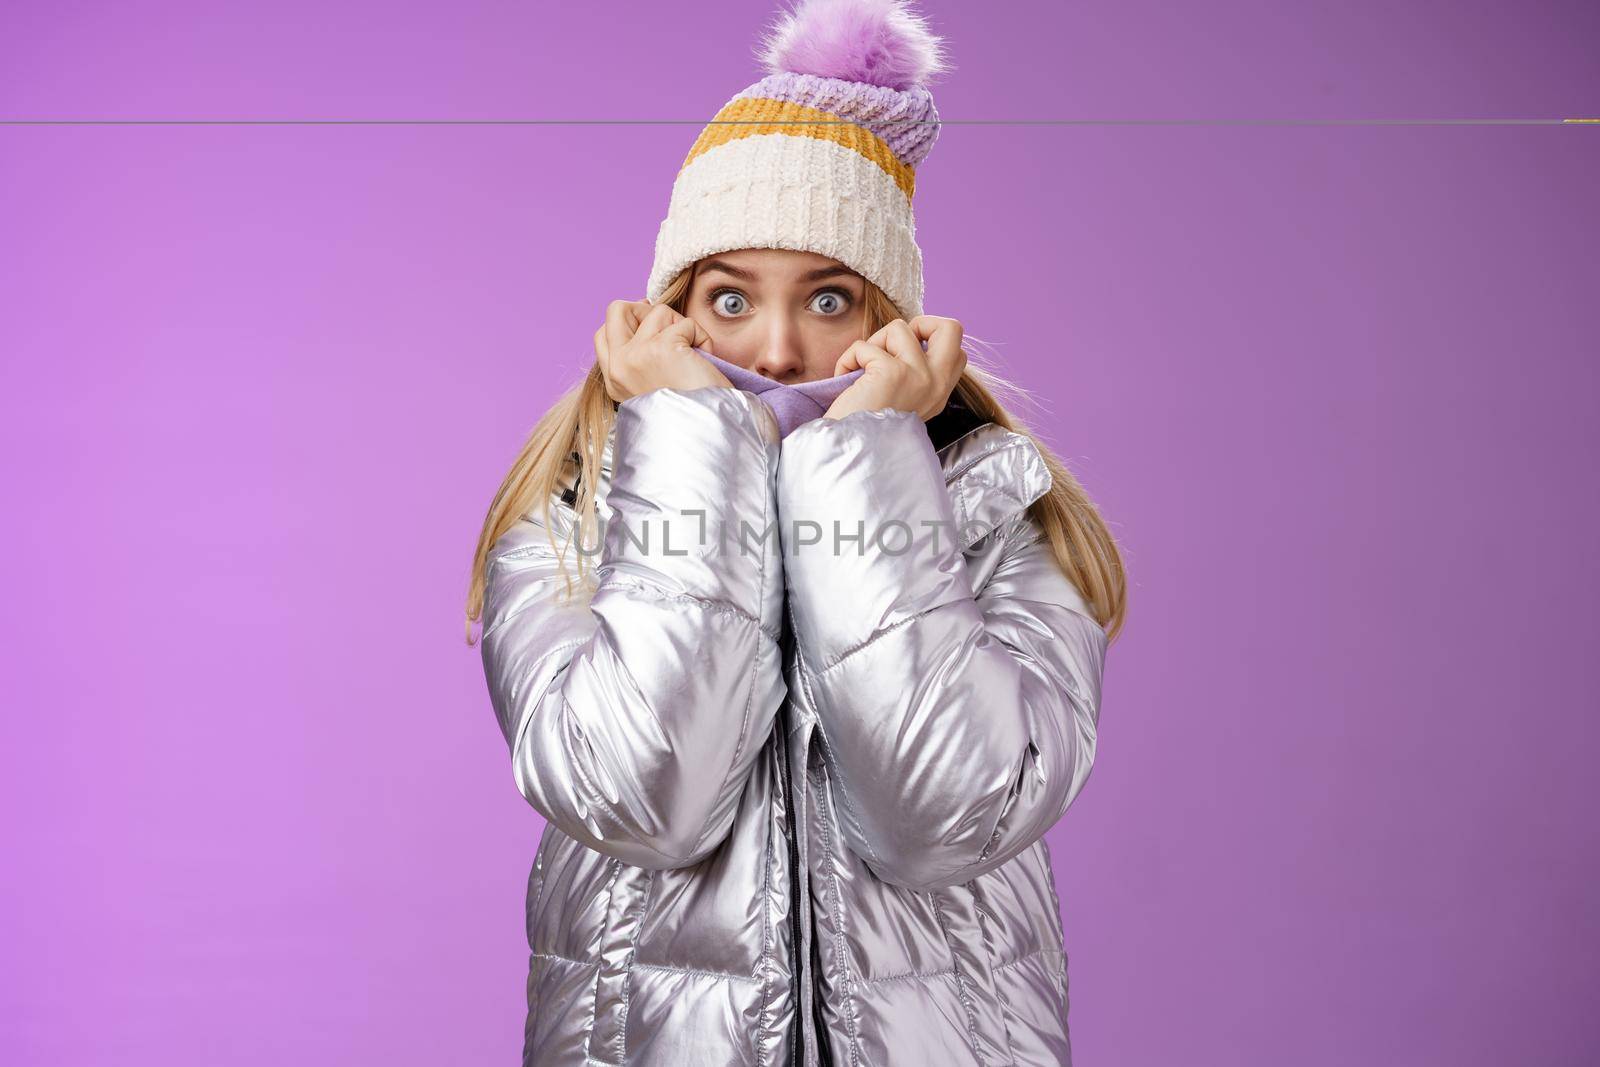 Afraid shocked young charming sister pulling jacket face cover hiding frightened scared terrifying stories snowman walking mountains widen eyes concerned look camera fear, standing purple background.